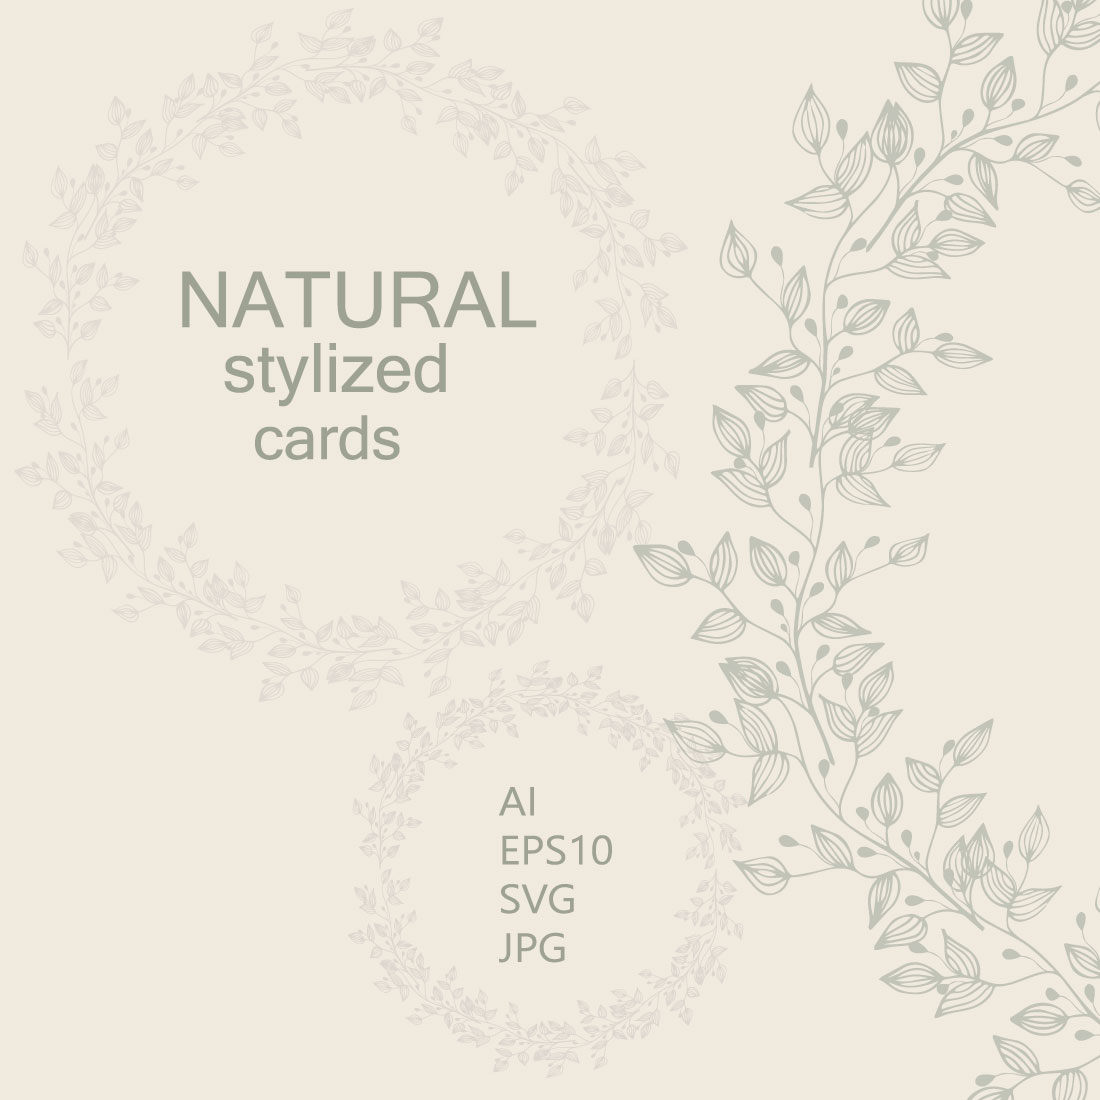 NATURAL stylized cards cover image.